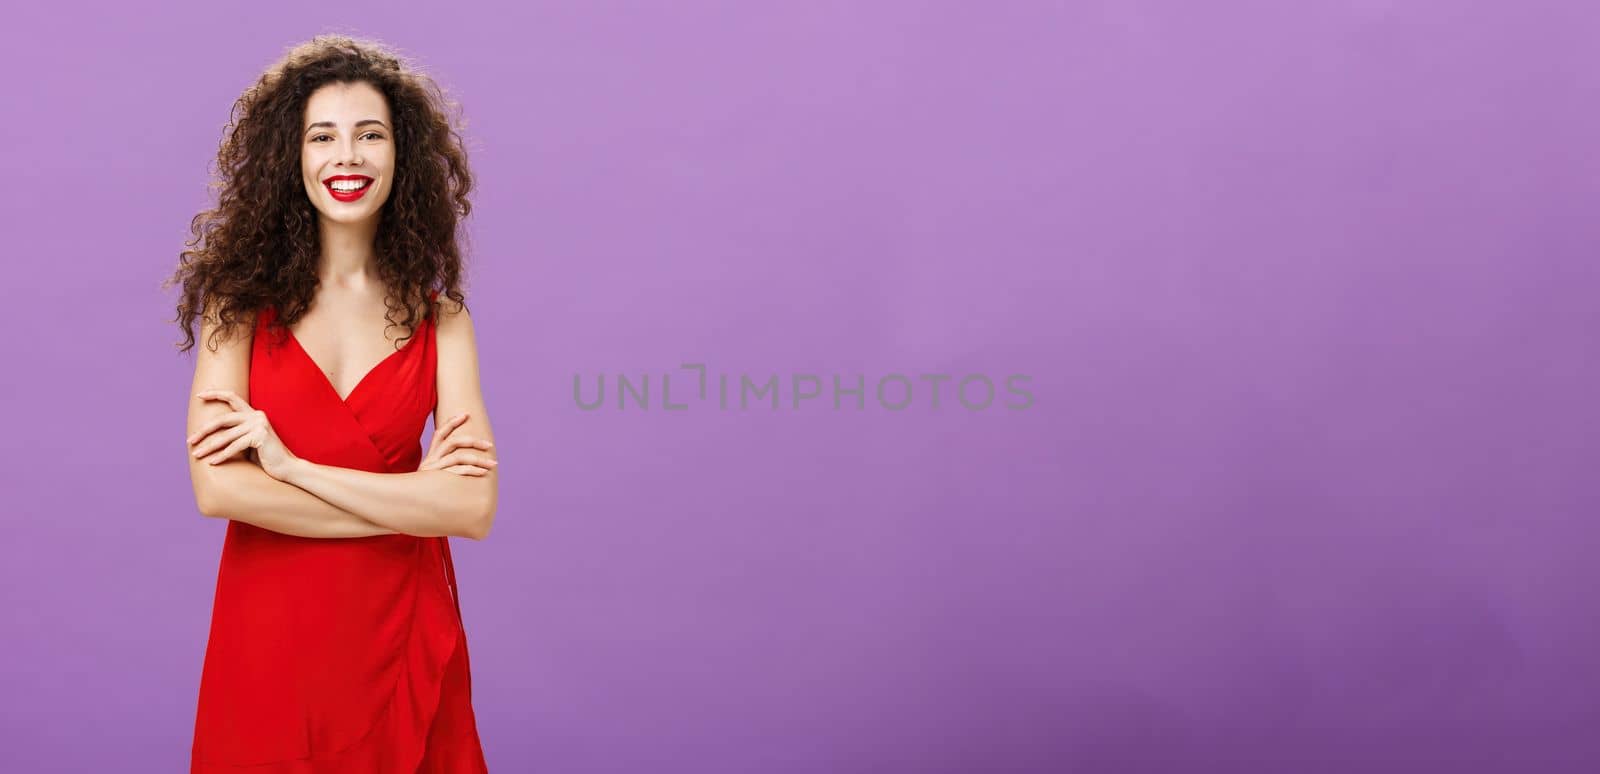 Cute ambitious and happy good-looking european woman. in luxurious red dress holding hands crossed in self-assured gesture smiling broadly having party celebrating graduation over purple background.